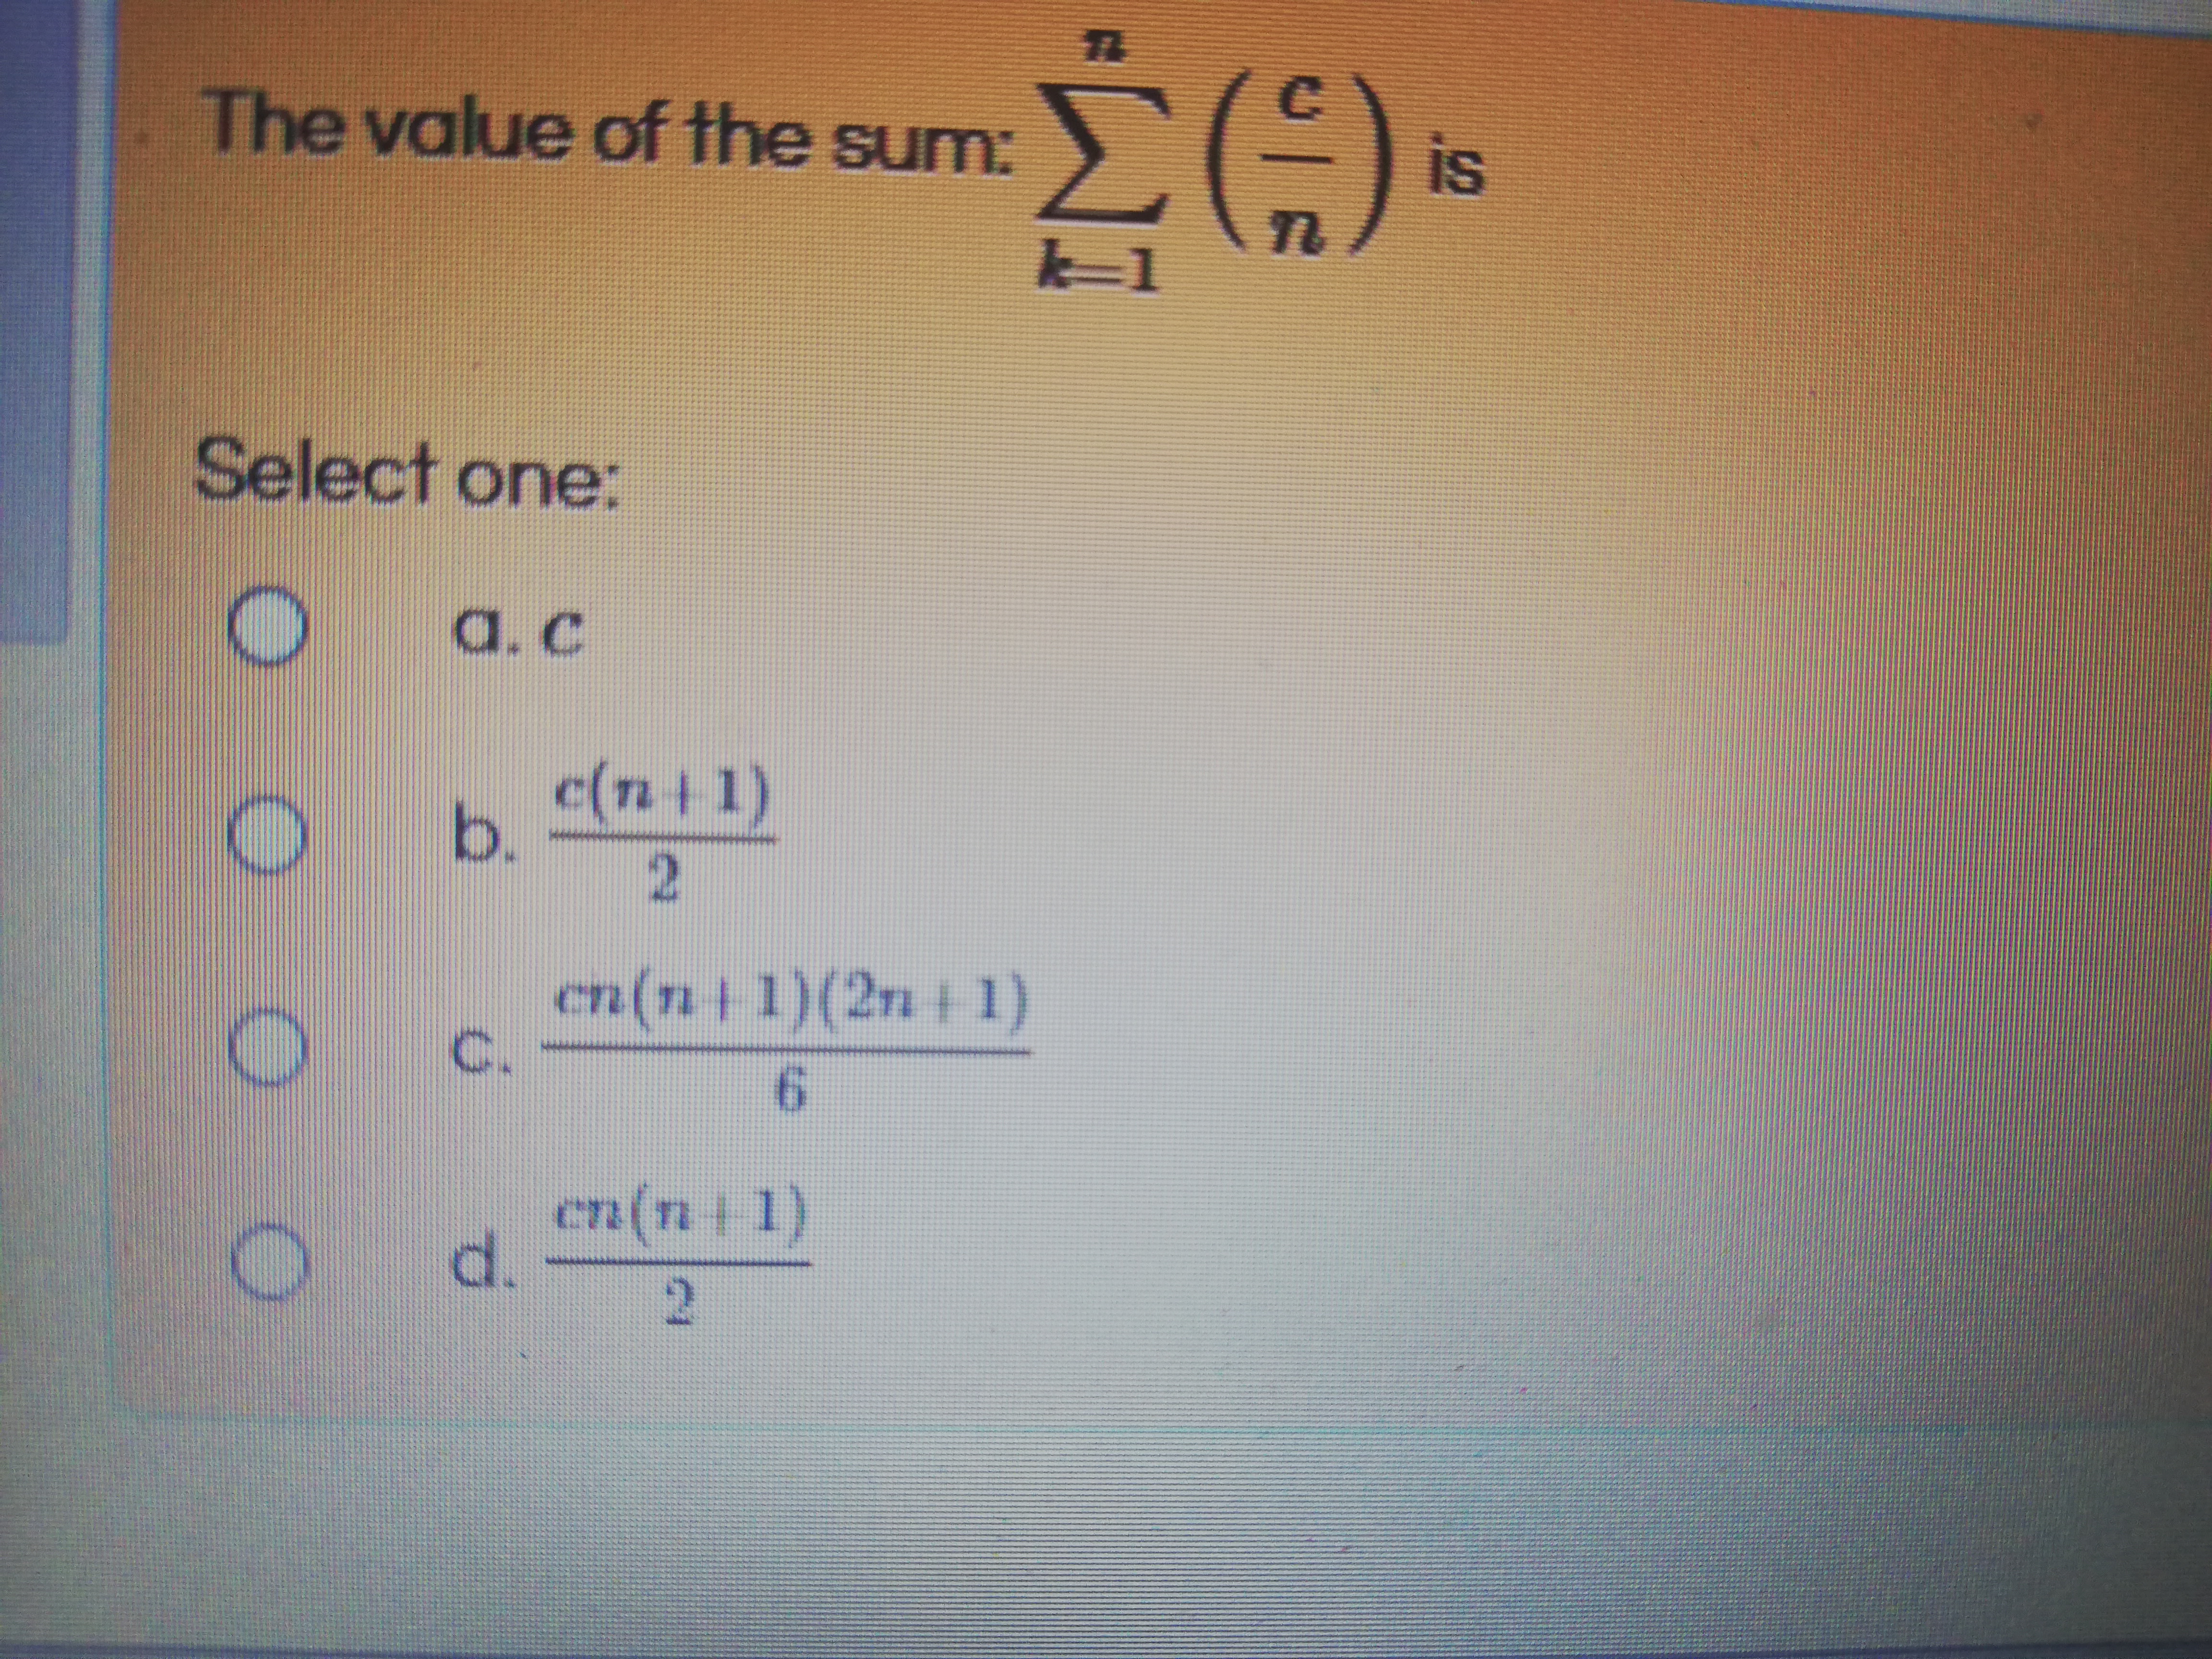 72
EG)
C
The value of the sum:
is
72
k31
